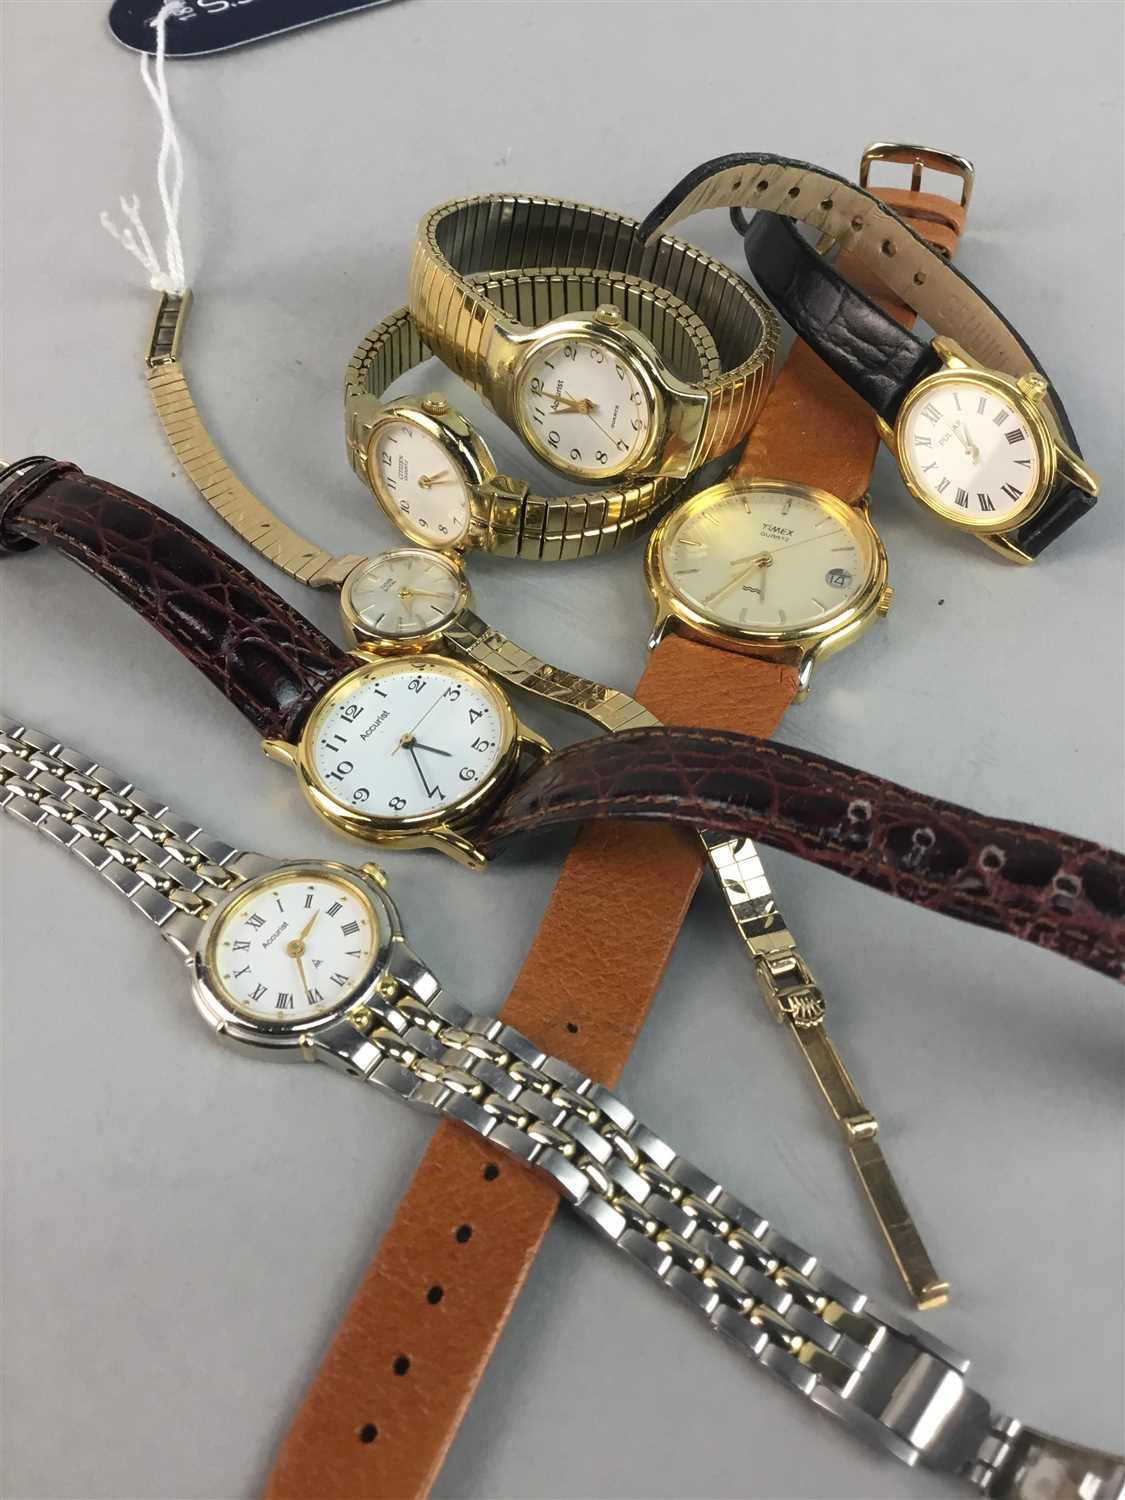 Lot 112 - A LADY'S GOLD BRACELET WATCH AND SIX OTHER WATCHES